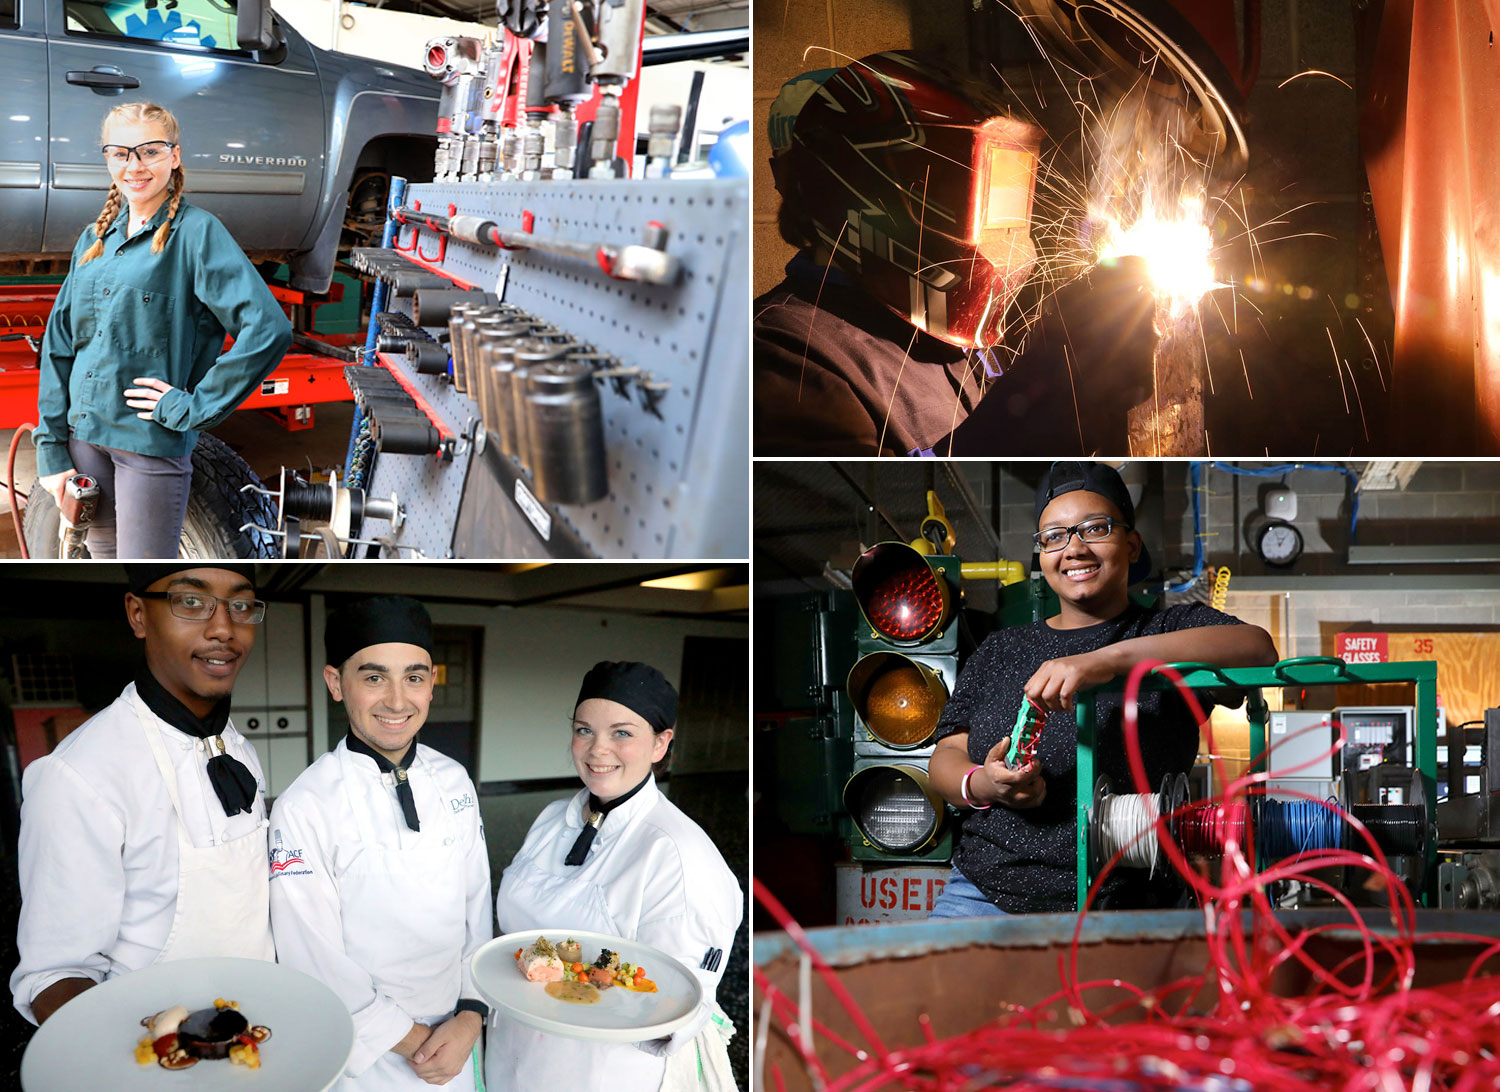 Collage of a female mechanic, a welder, a female electrician and a group of culinary arts students